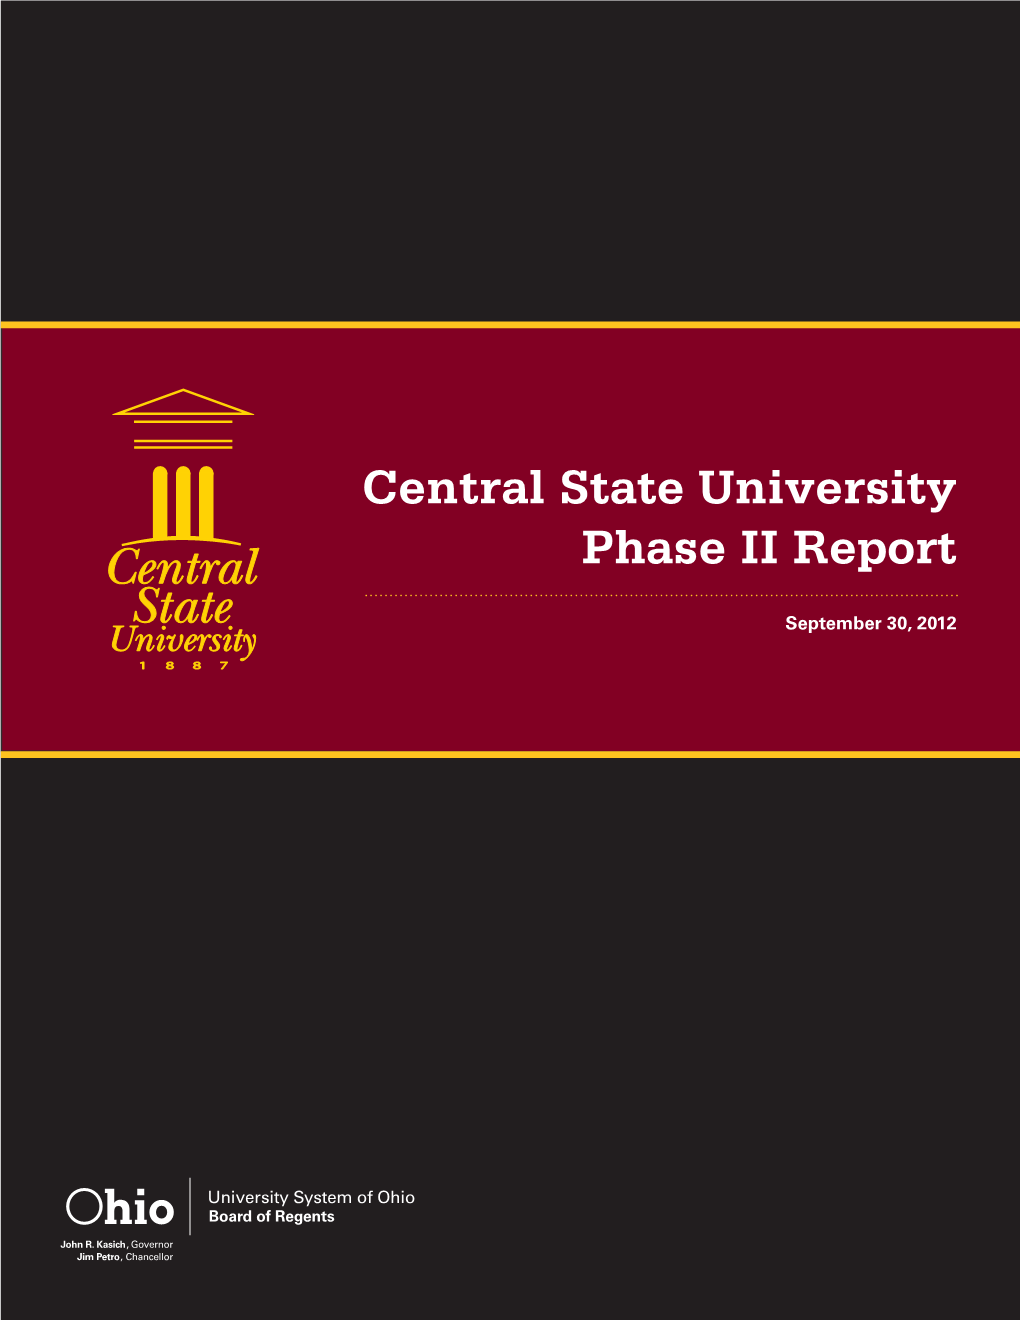 Central State University Phase II Report